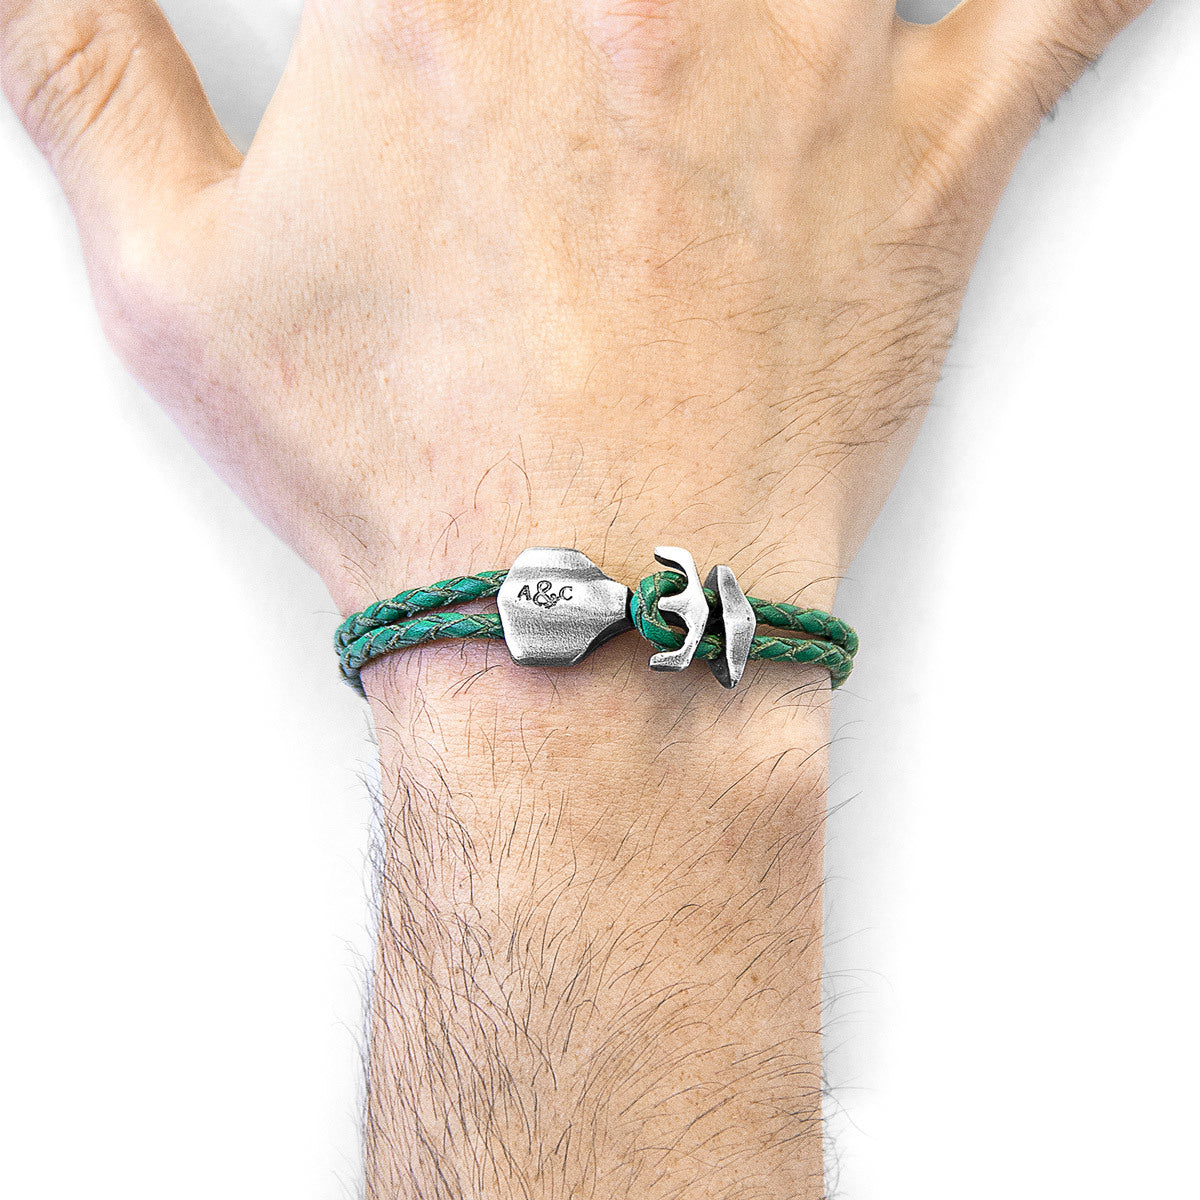 Fern Green Delta Anchor Silver and Leather Bracelet - Handcrafted in Great Britain Bijou Her